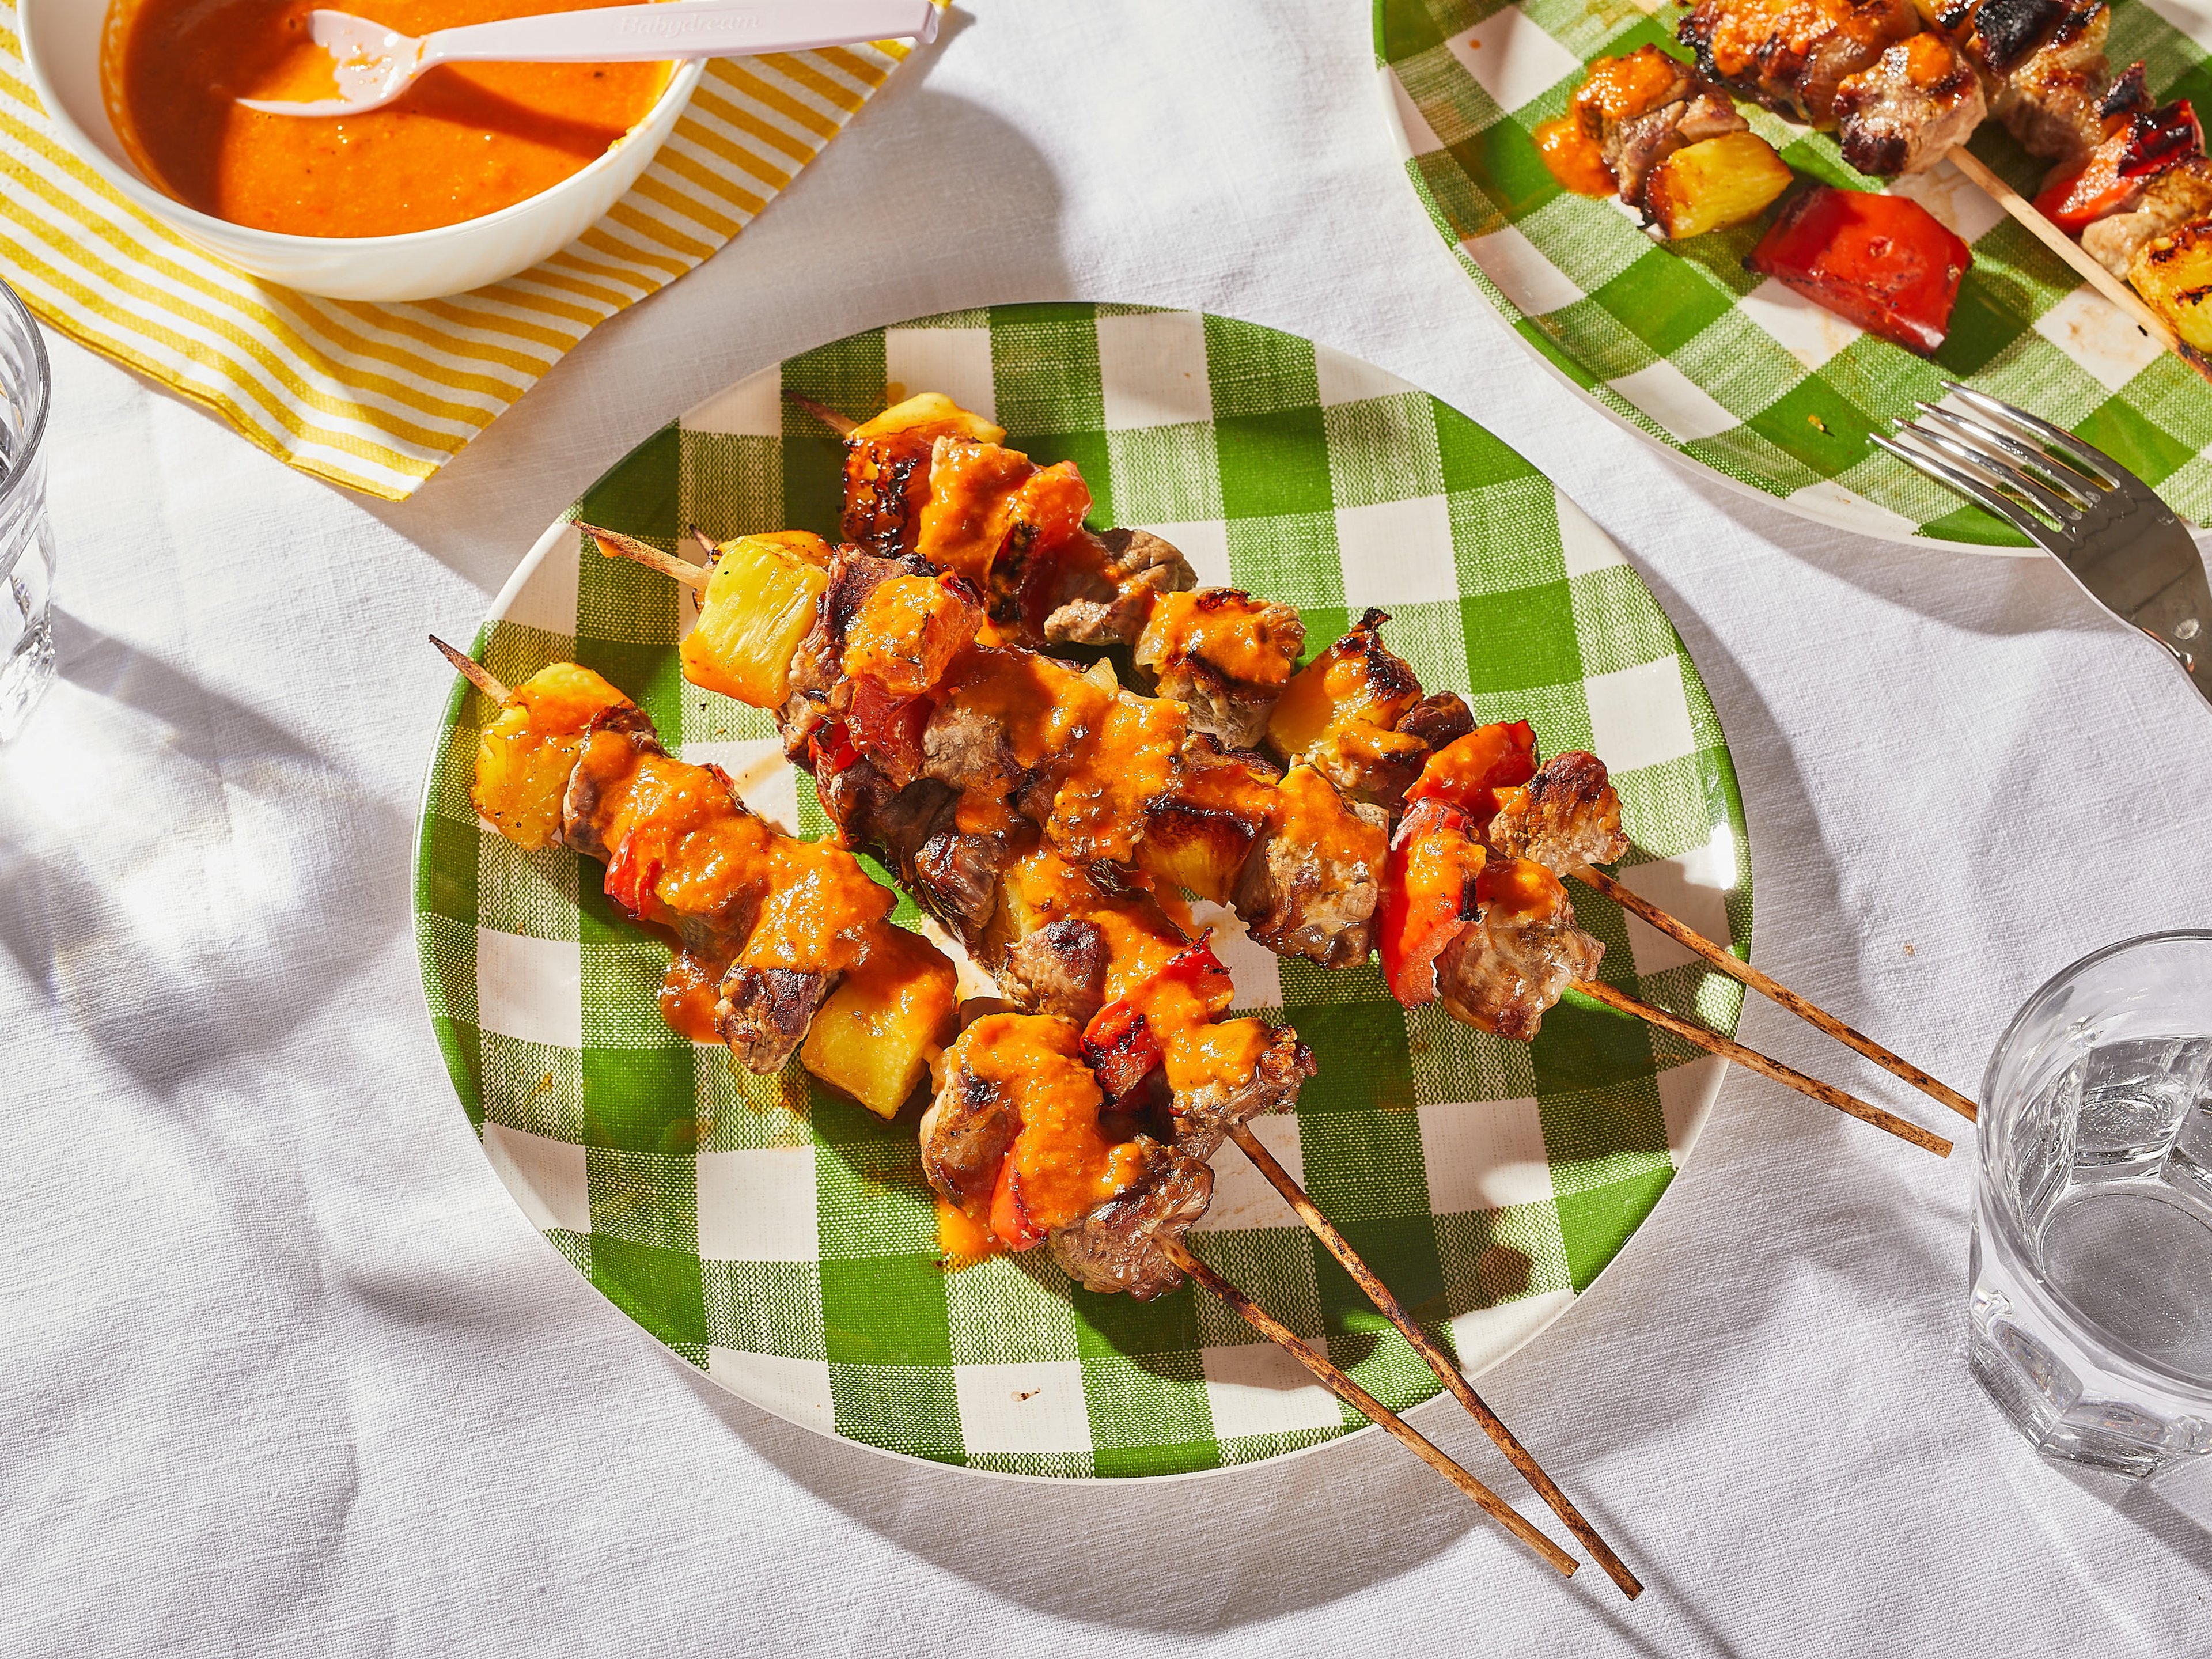 Grilled sweet and sour pork skewers